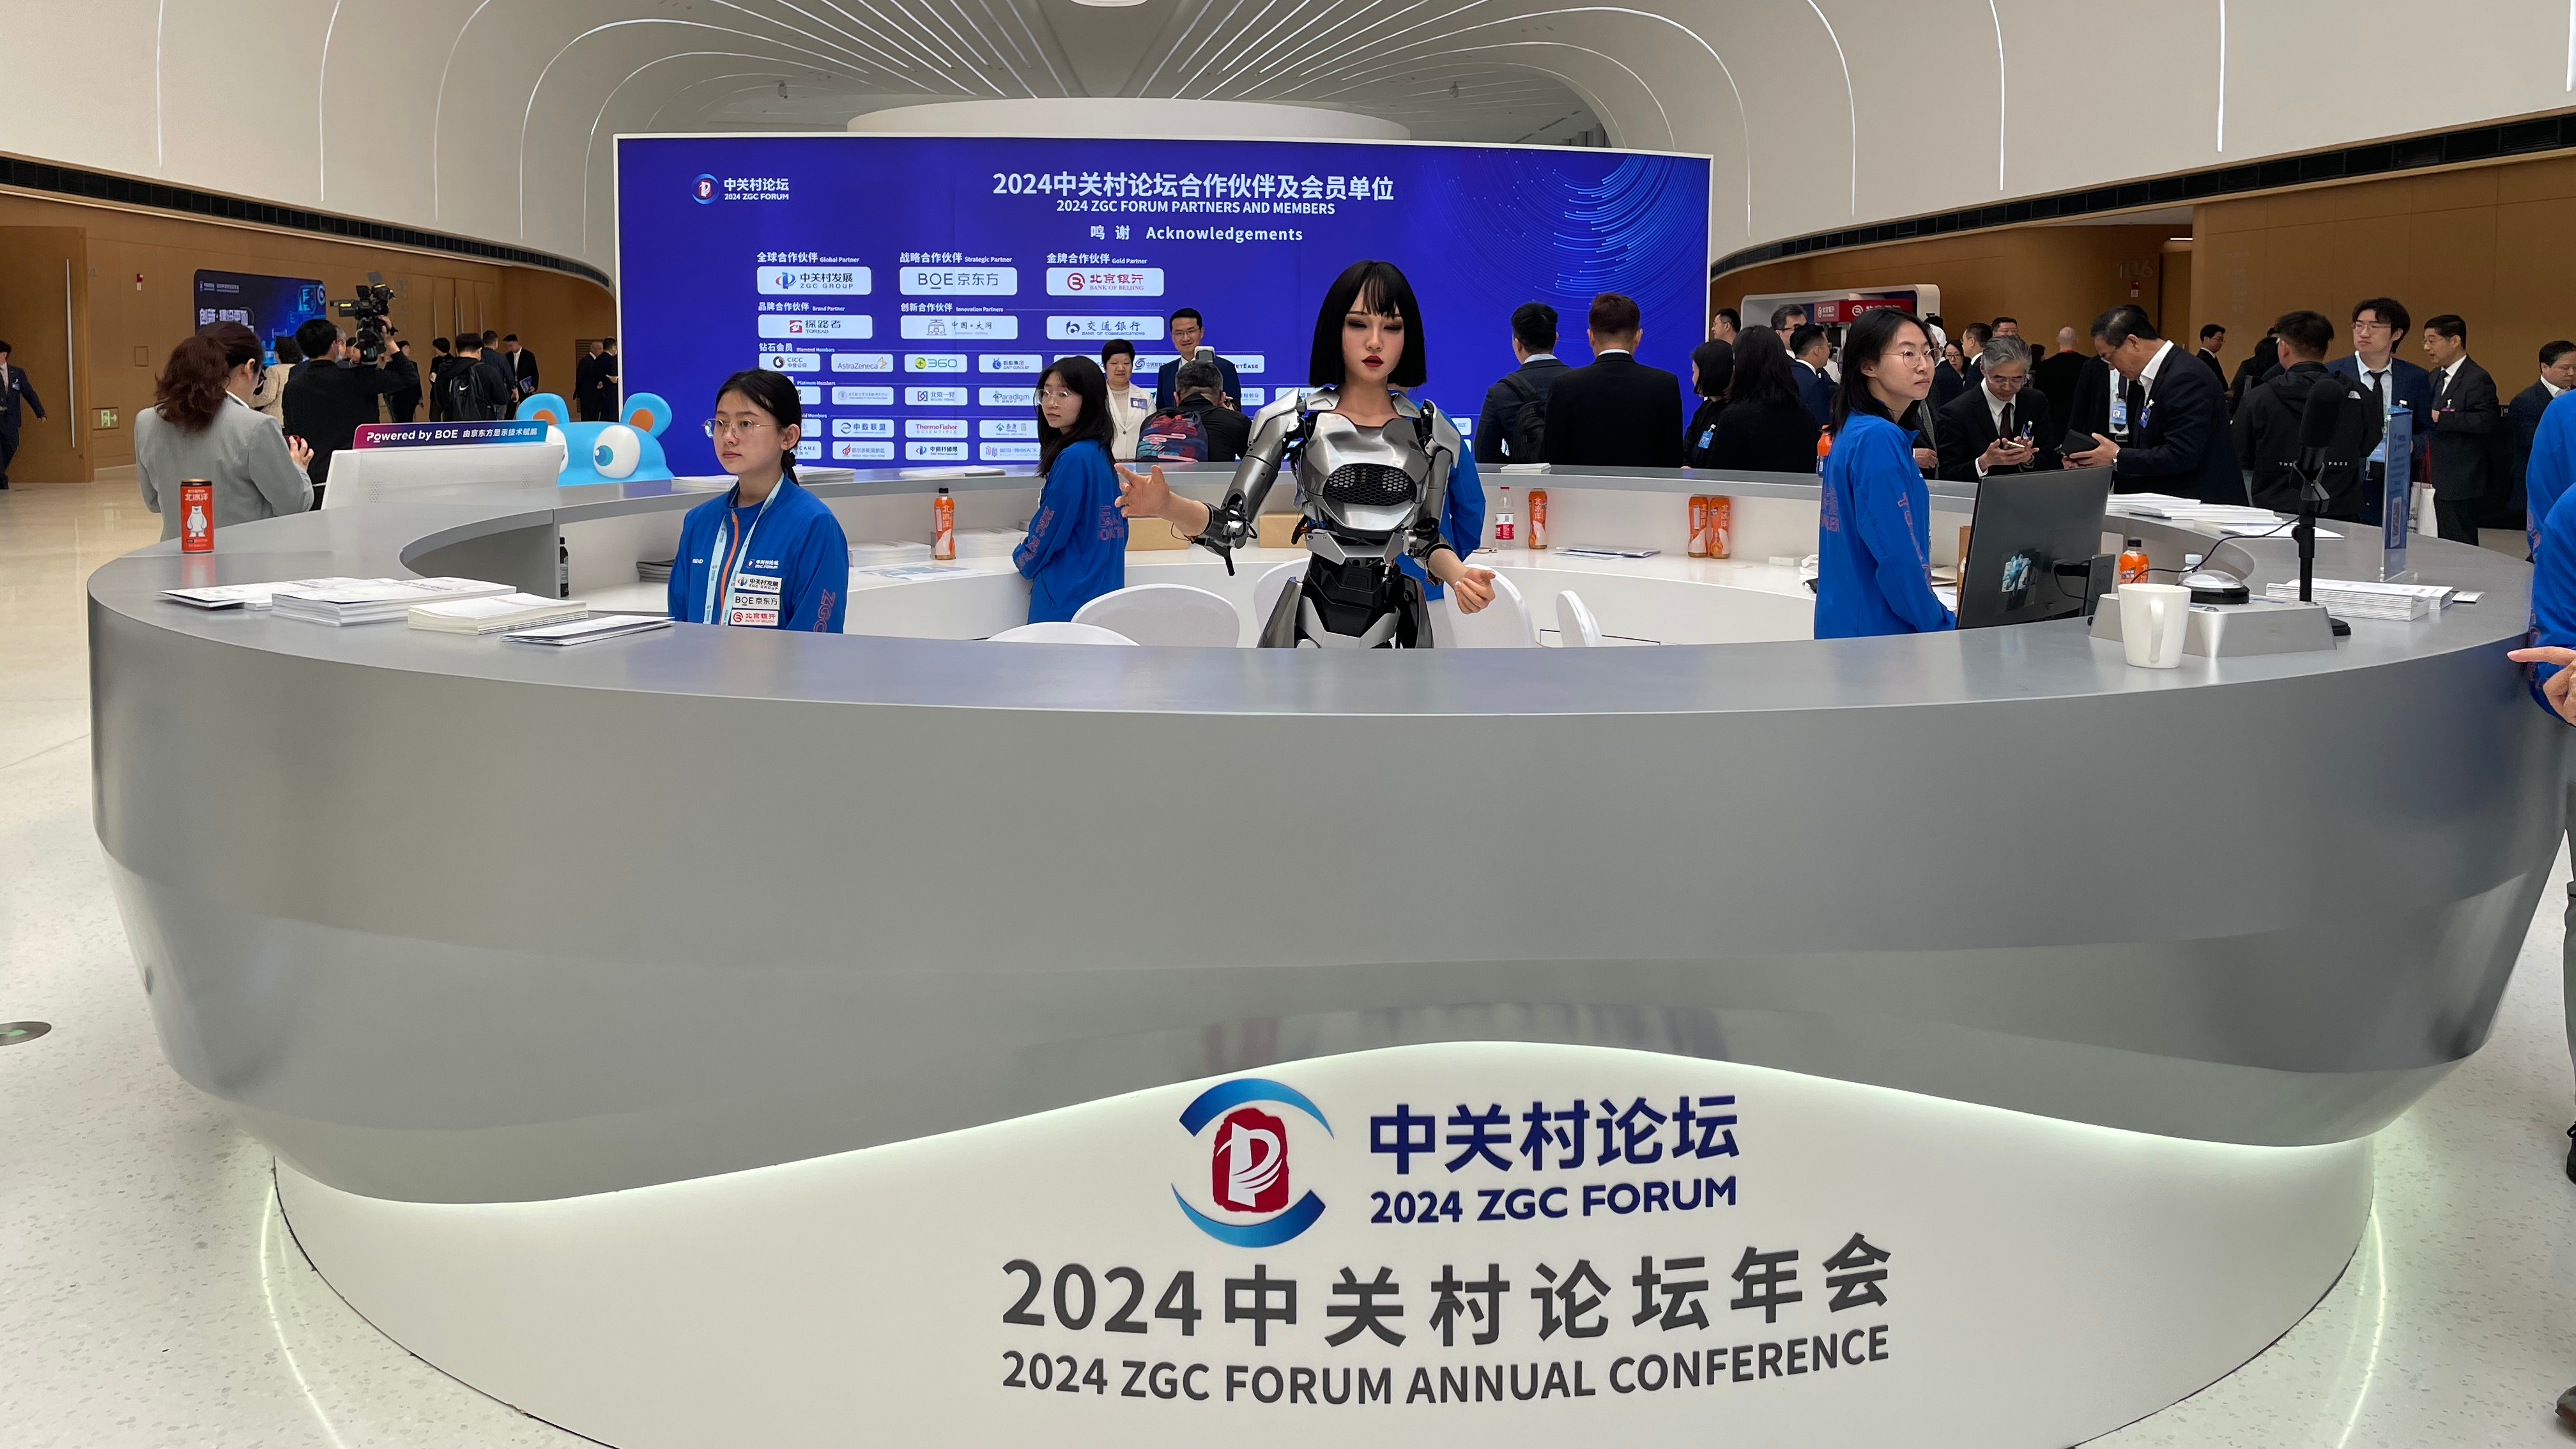 Live: Innovation knows no bounds! Reporter's on-site visit to 2024 Zhongguancun Forum